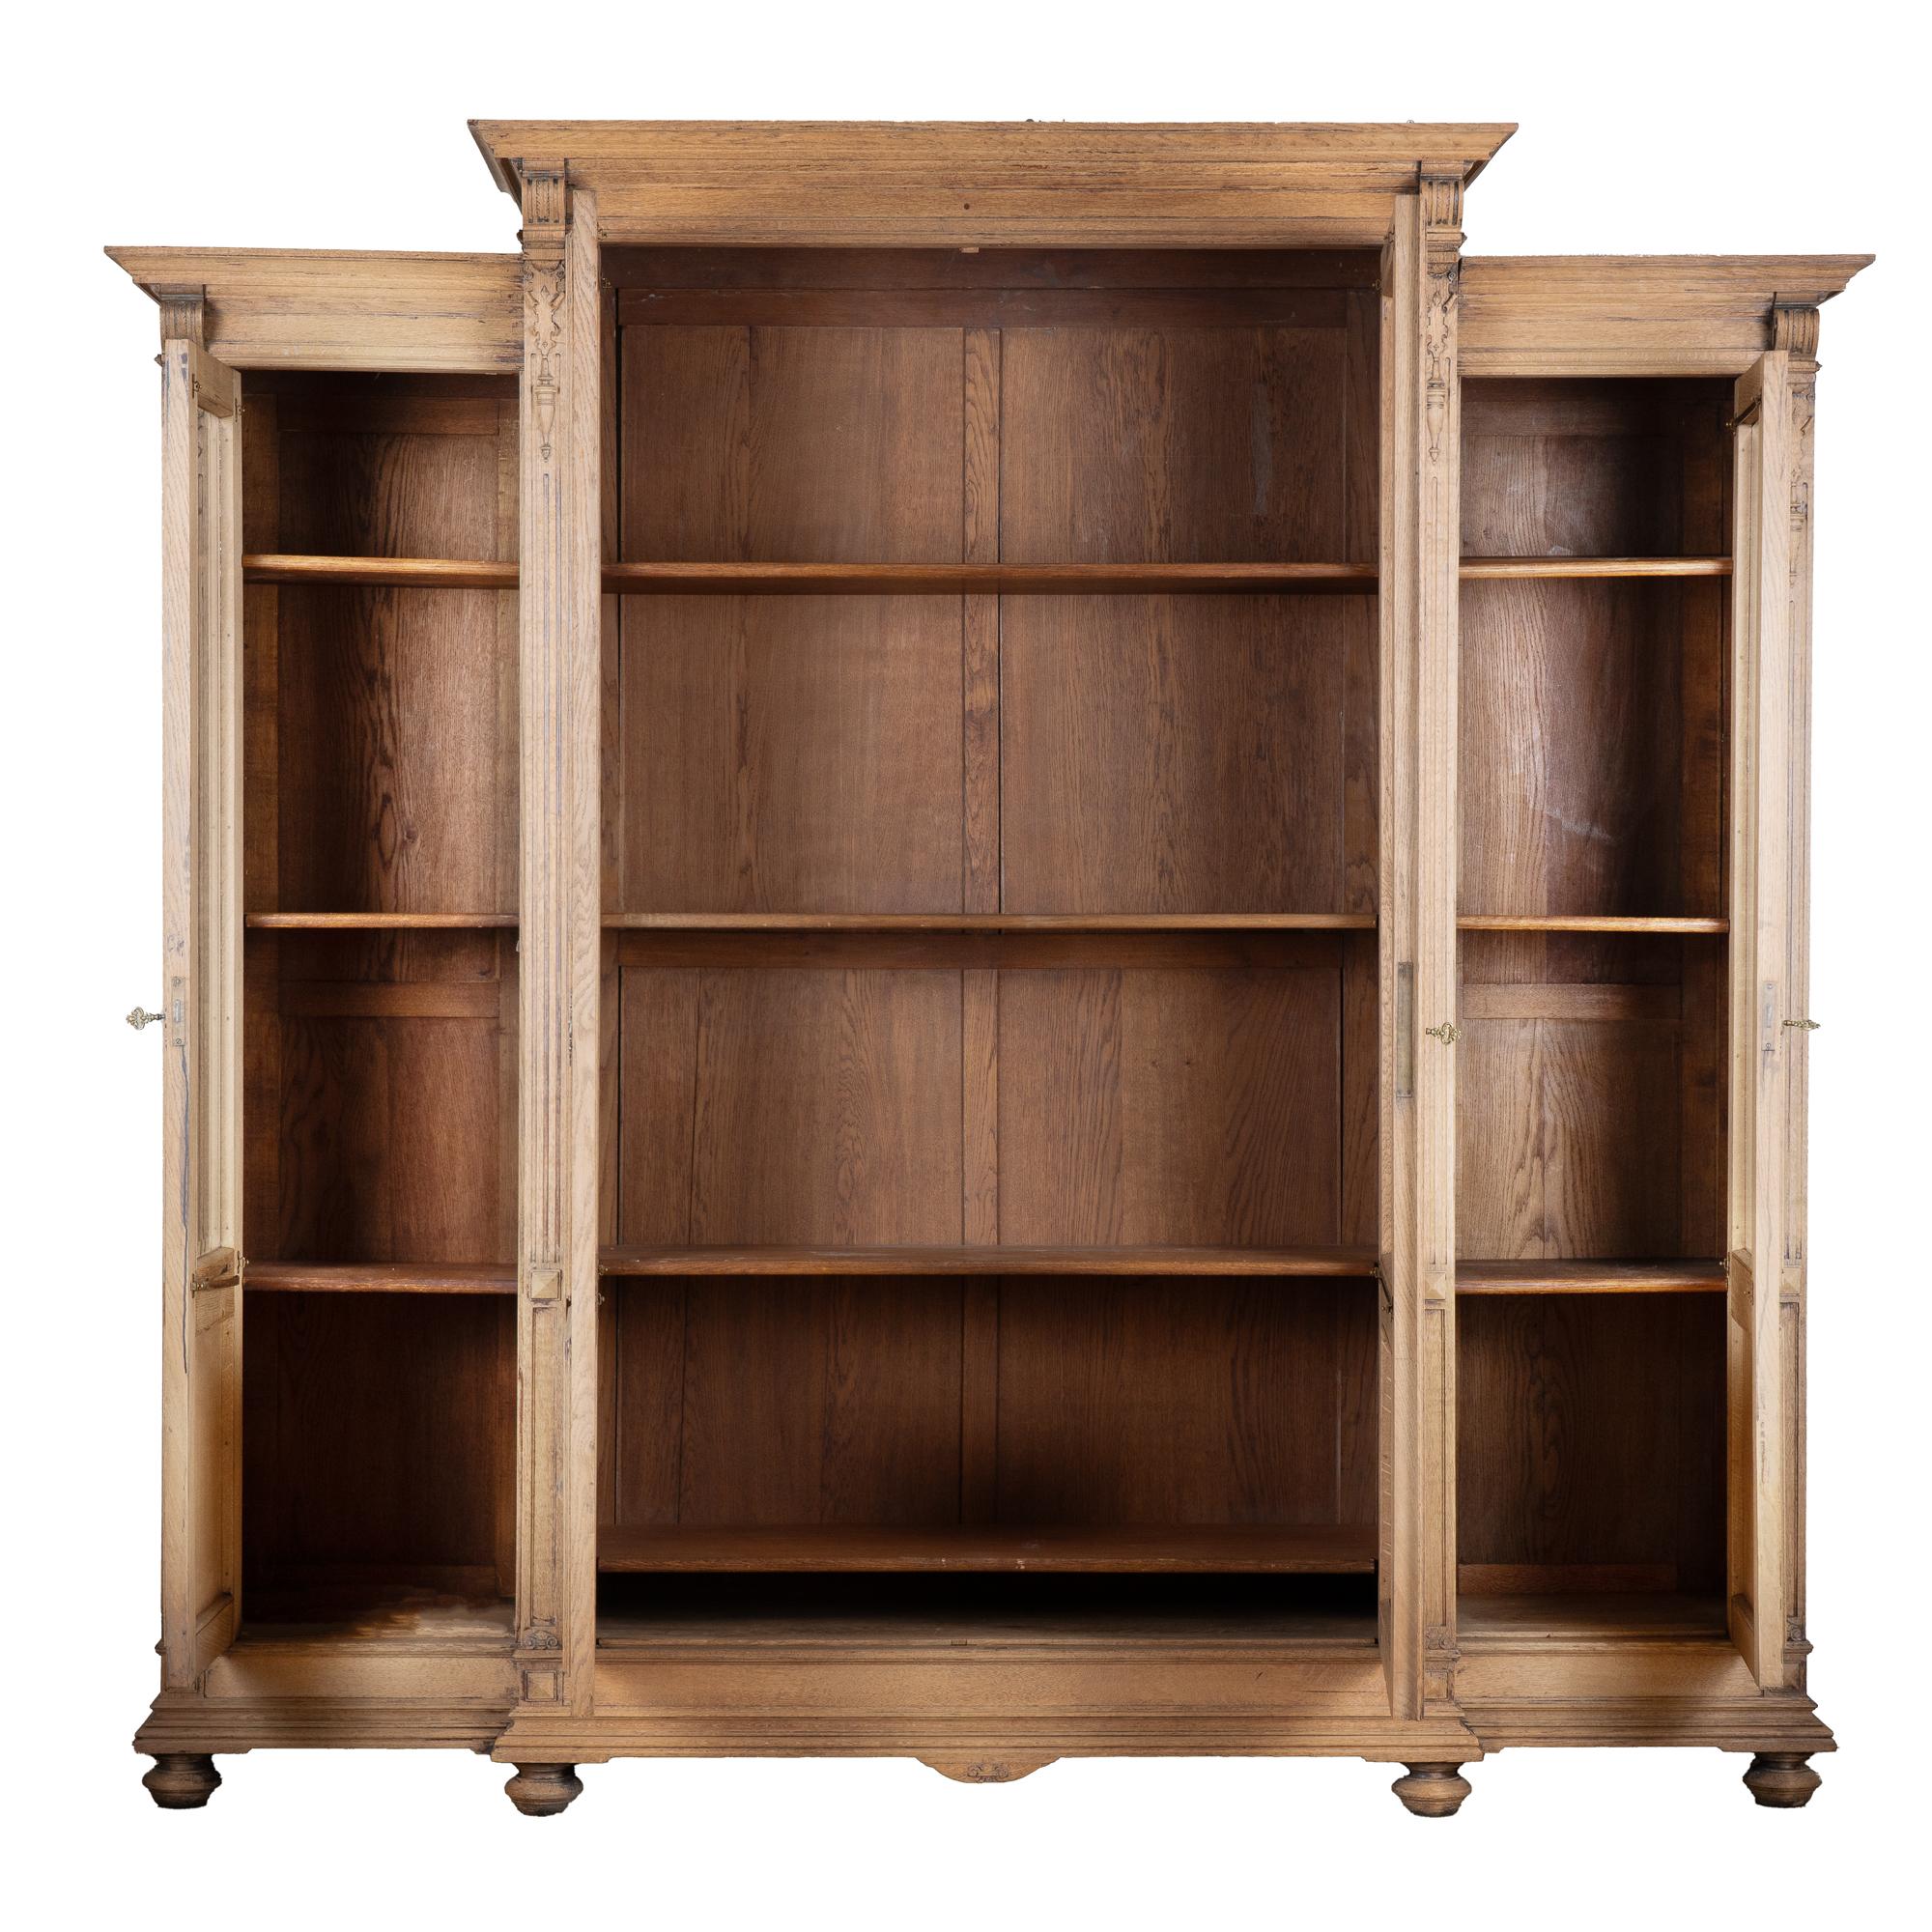 Country French Bleached Oak Bookcase Display Cabinet With Adjustable Shelves, circa 1880